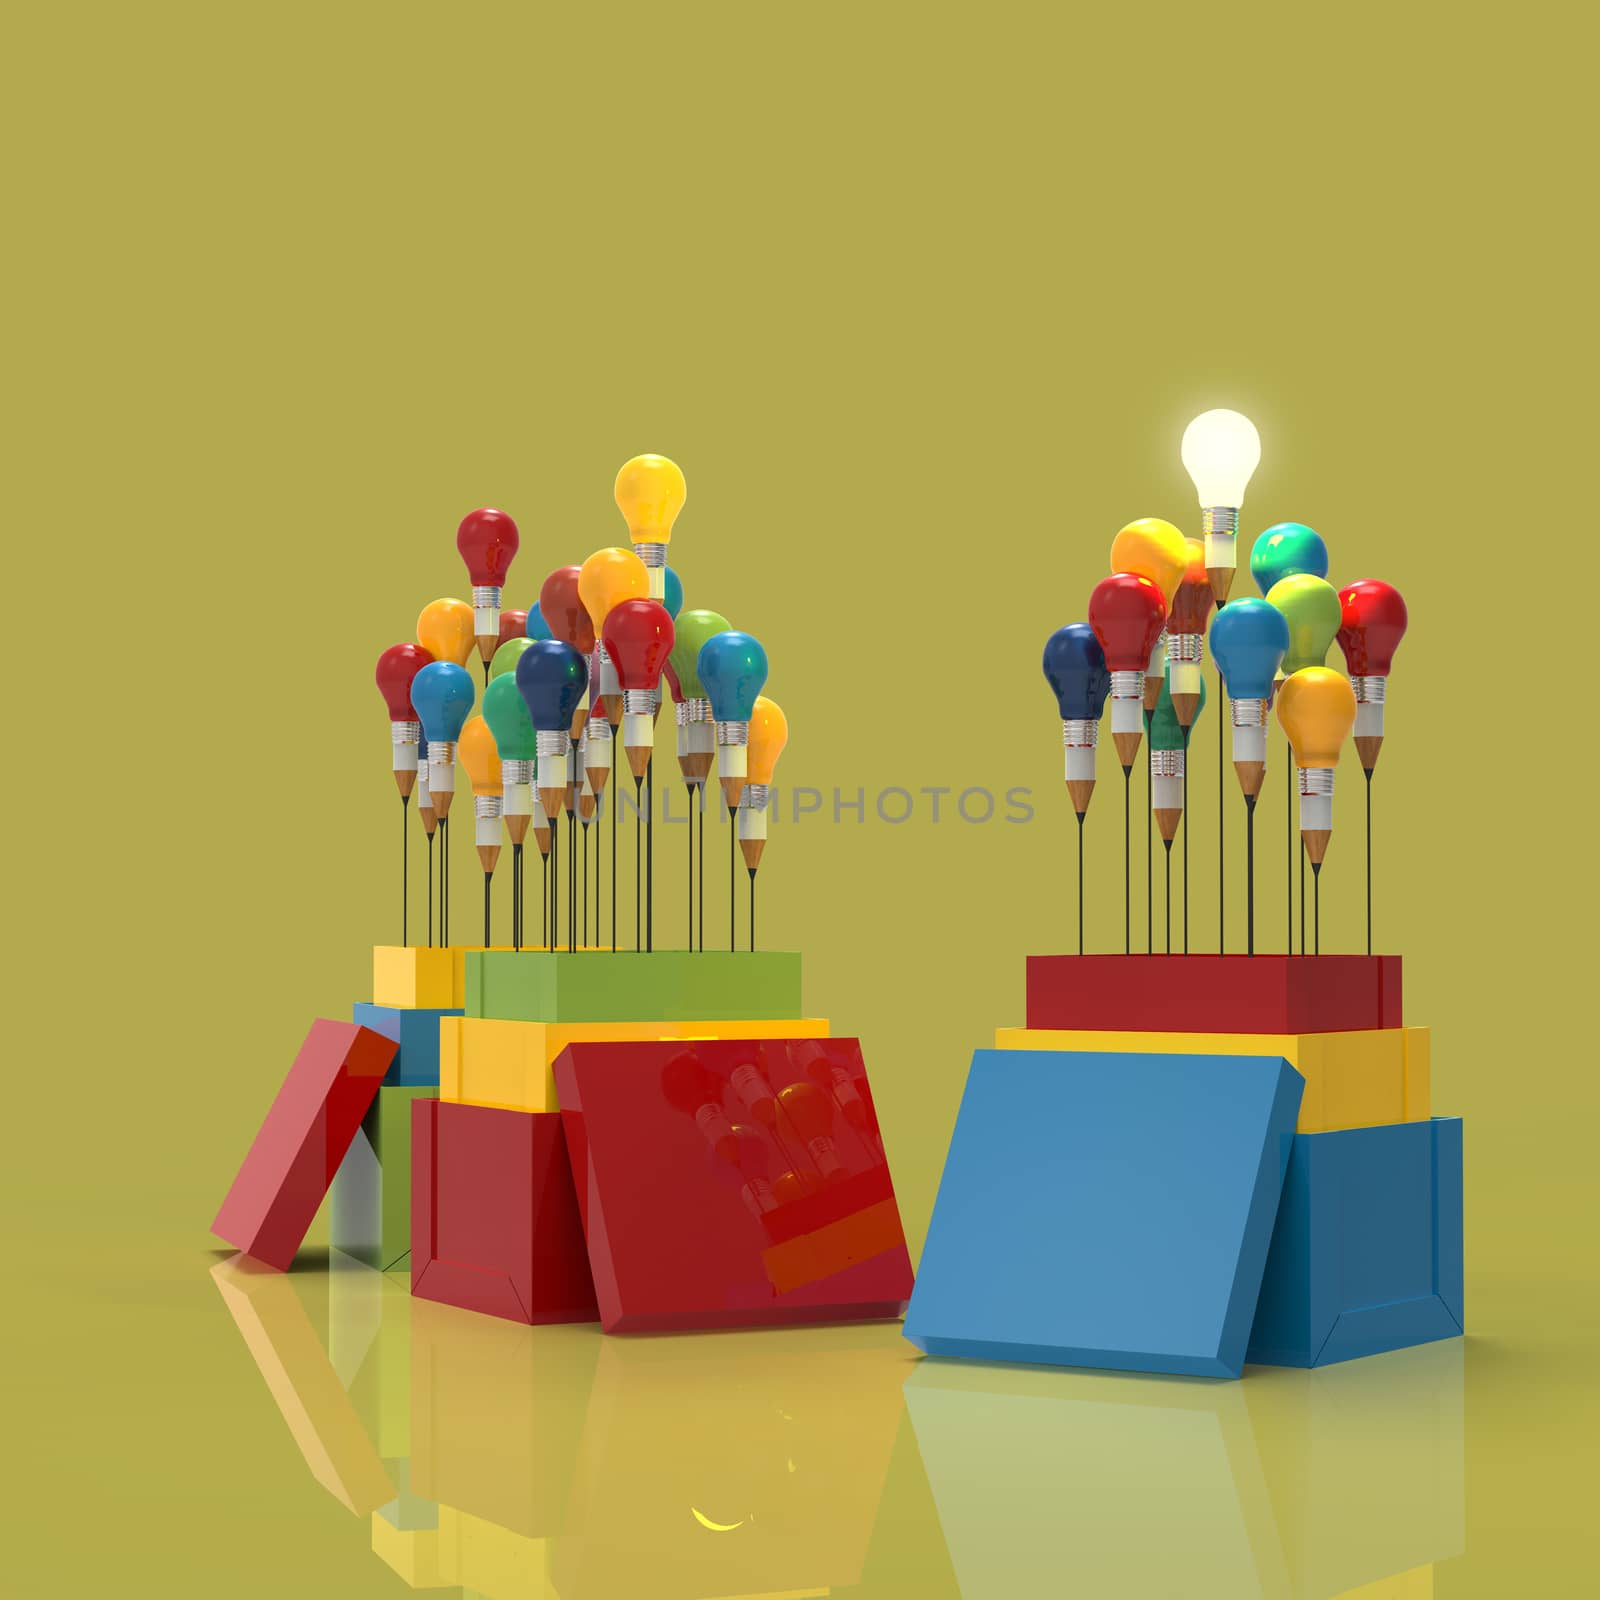 pencil light bulb 3d as think outside of the box and leadership  by everythingpossible